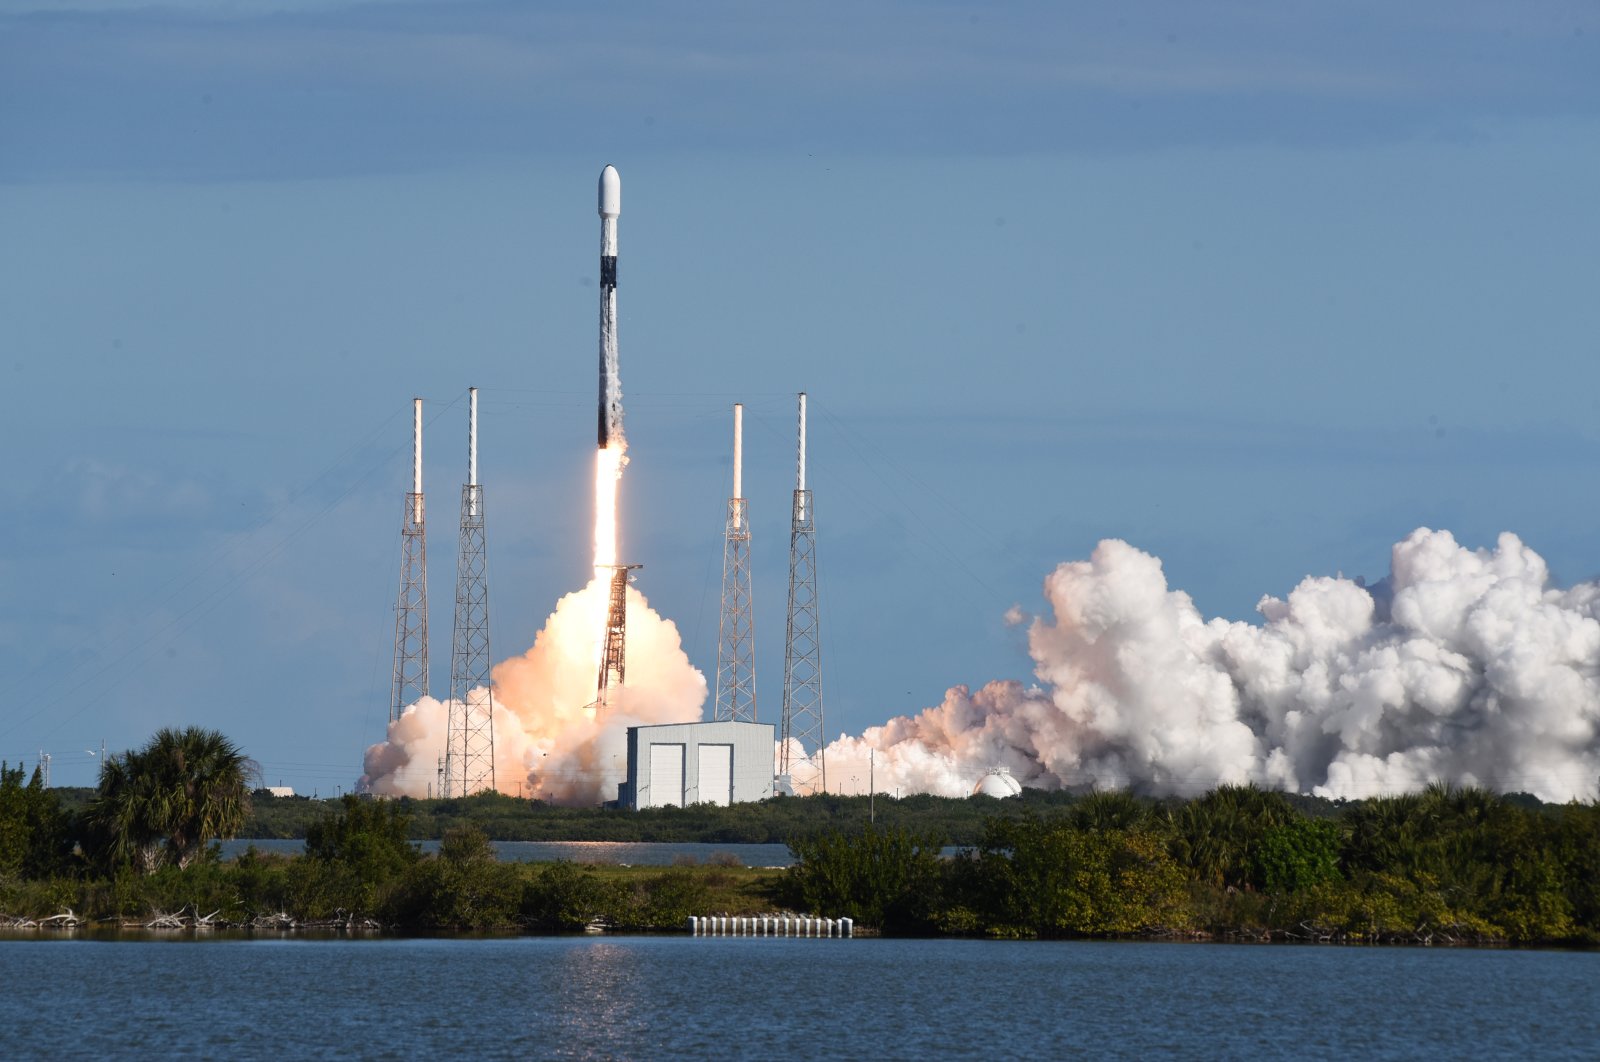 Turkey’s first mini satellite Grizu-263A is launched on SpaceX’s Falcon 9 rocket from Cape Canaveral, Florida, U.S., Jan. 13, 2022. (AA Photo)